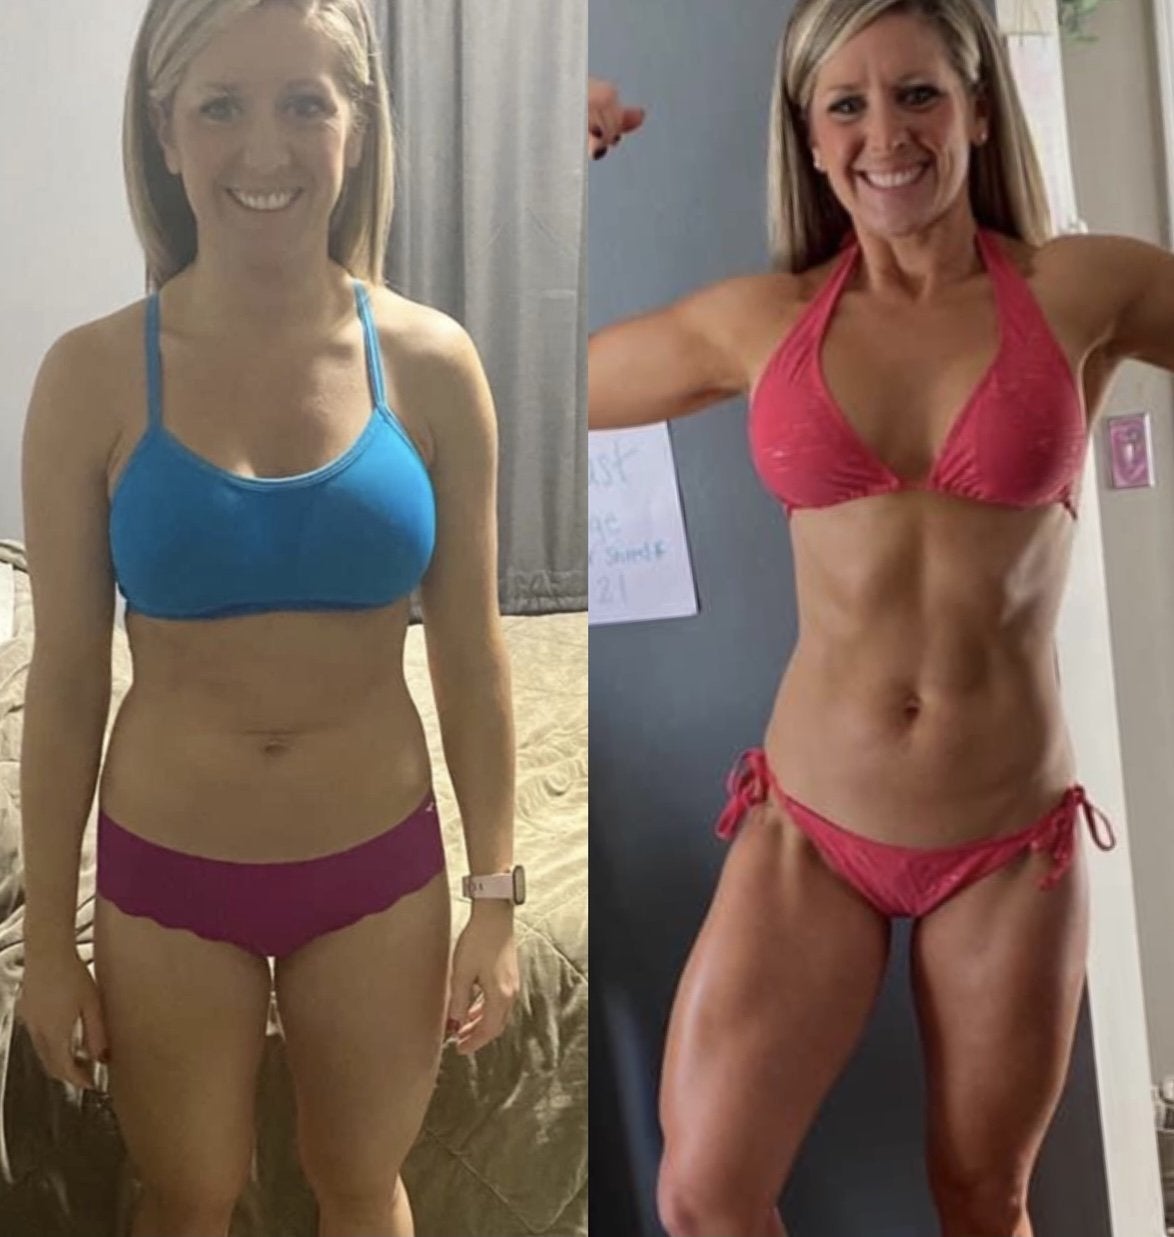 44F - Started lifting 8 months ago and love it : r/fitness30plus